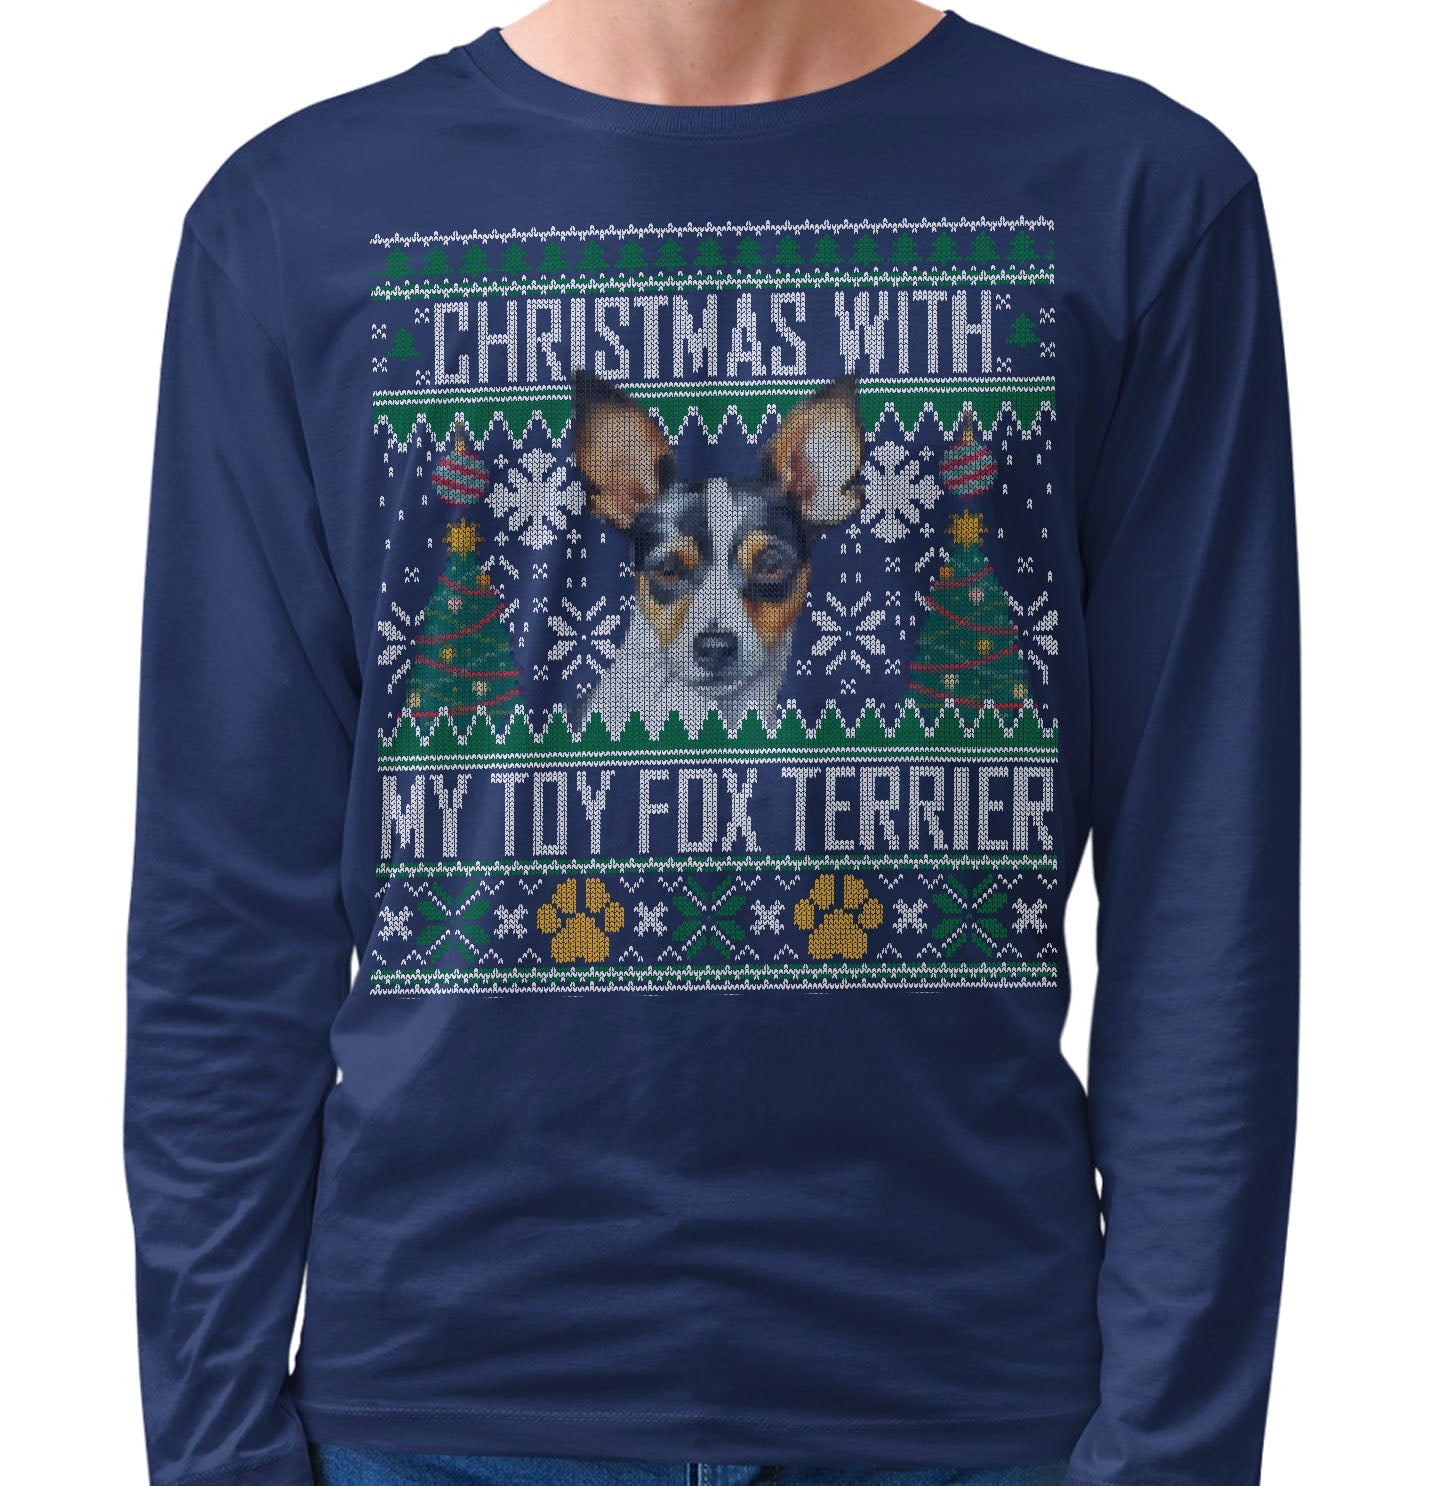 Ugly Sweater Christmas with My Toy Fox Terrier - Adult Unisex Long Sleeve T-Shirt